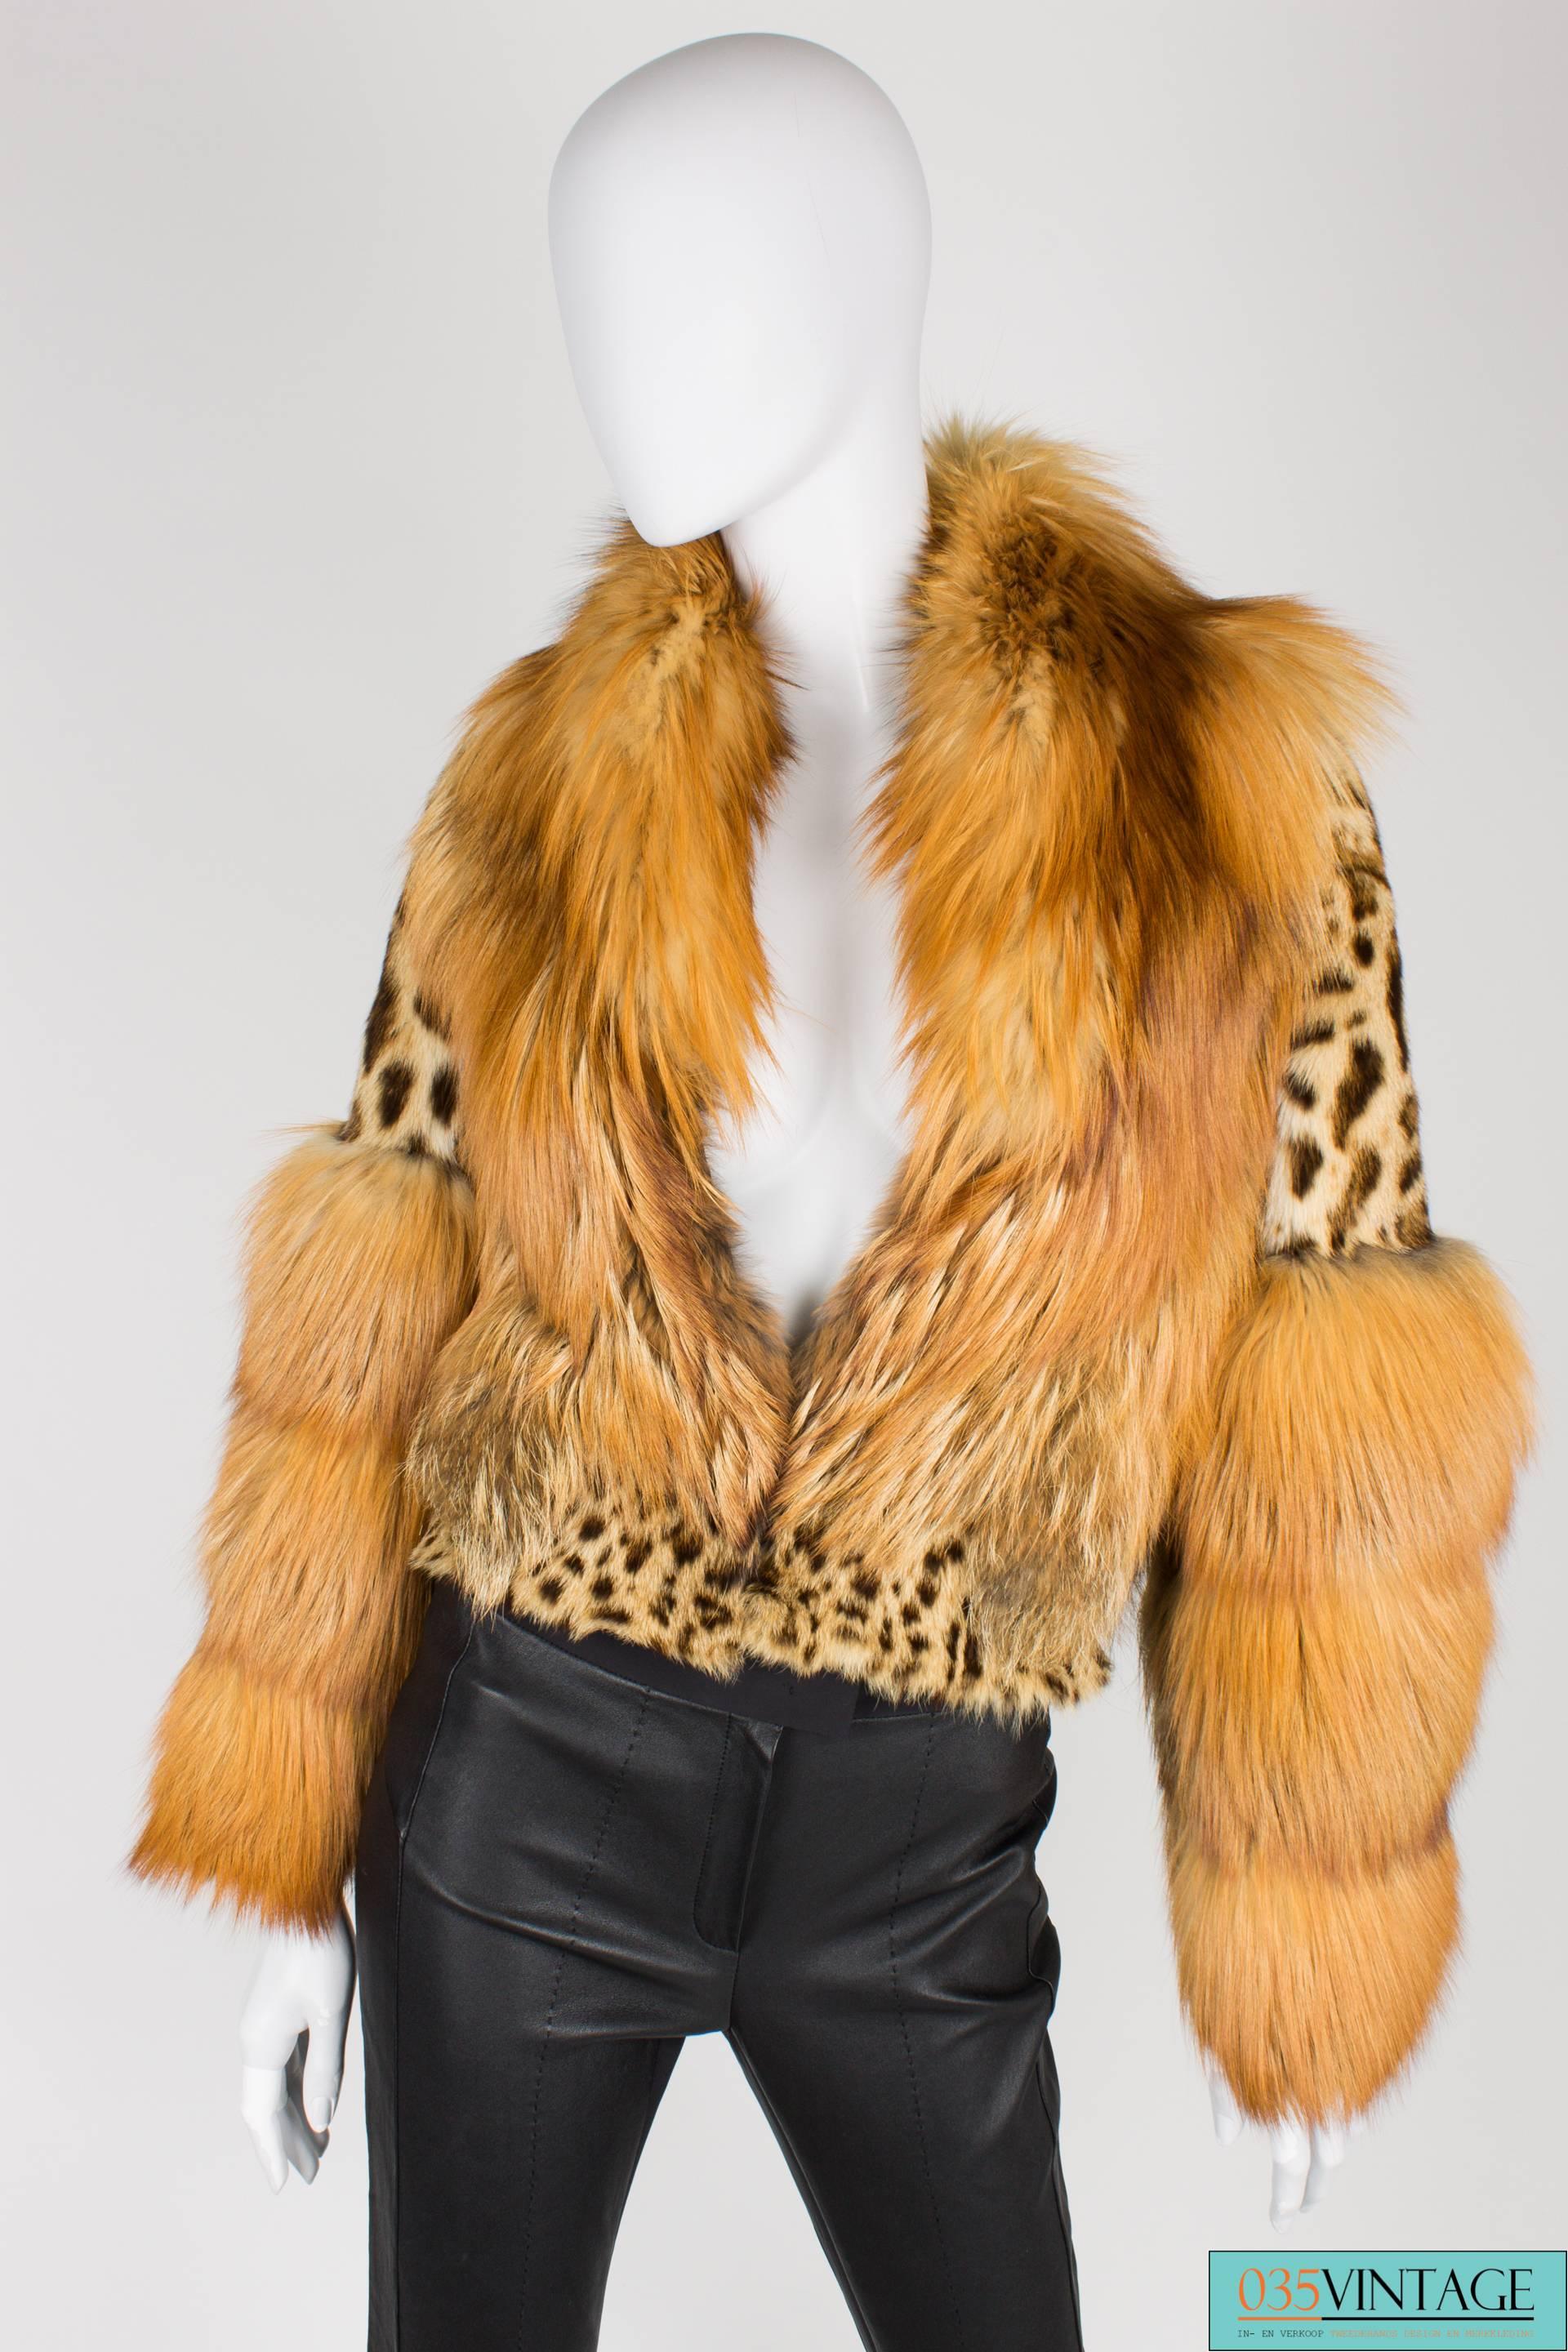 Different kinds of fur are used in this coat by Gucci.

Fully lined with dark brown leather and the lower part of the coat is removable. So you will be able to wear it as a mantle or short like a jacket.

On the sleeves and in the waist the fur